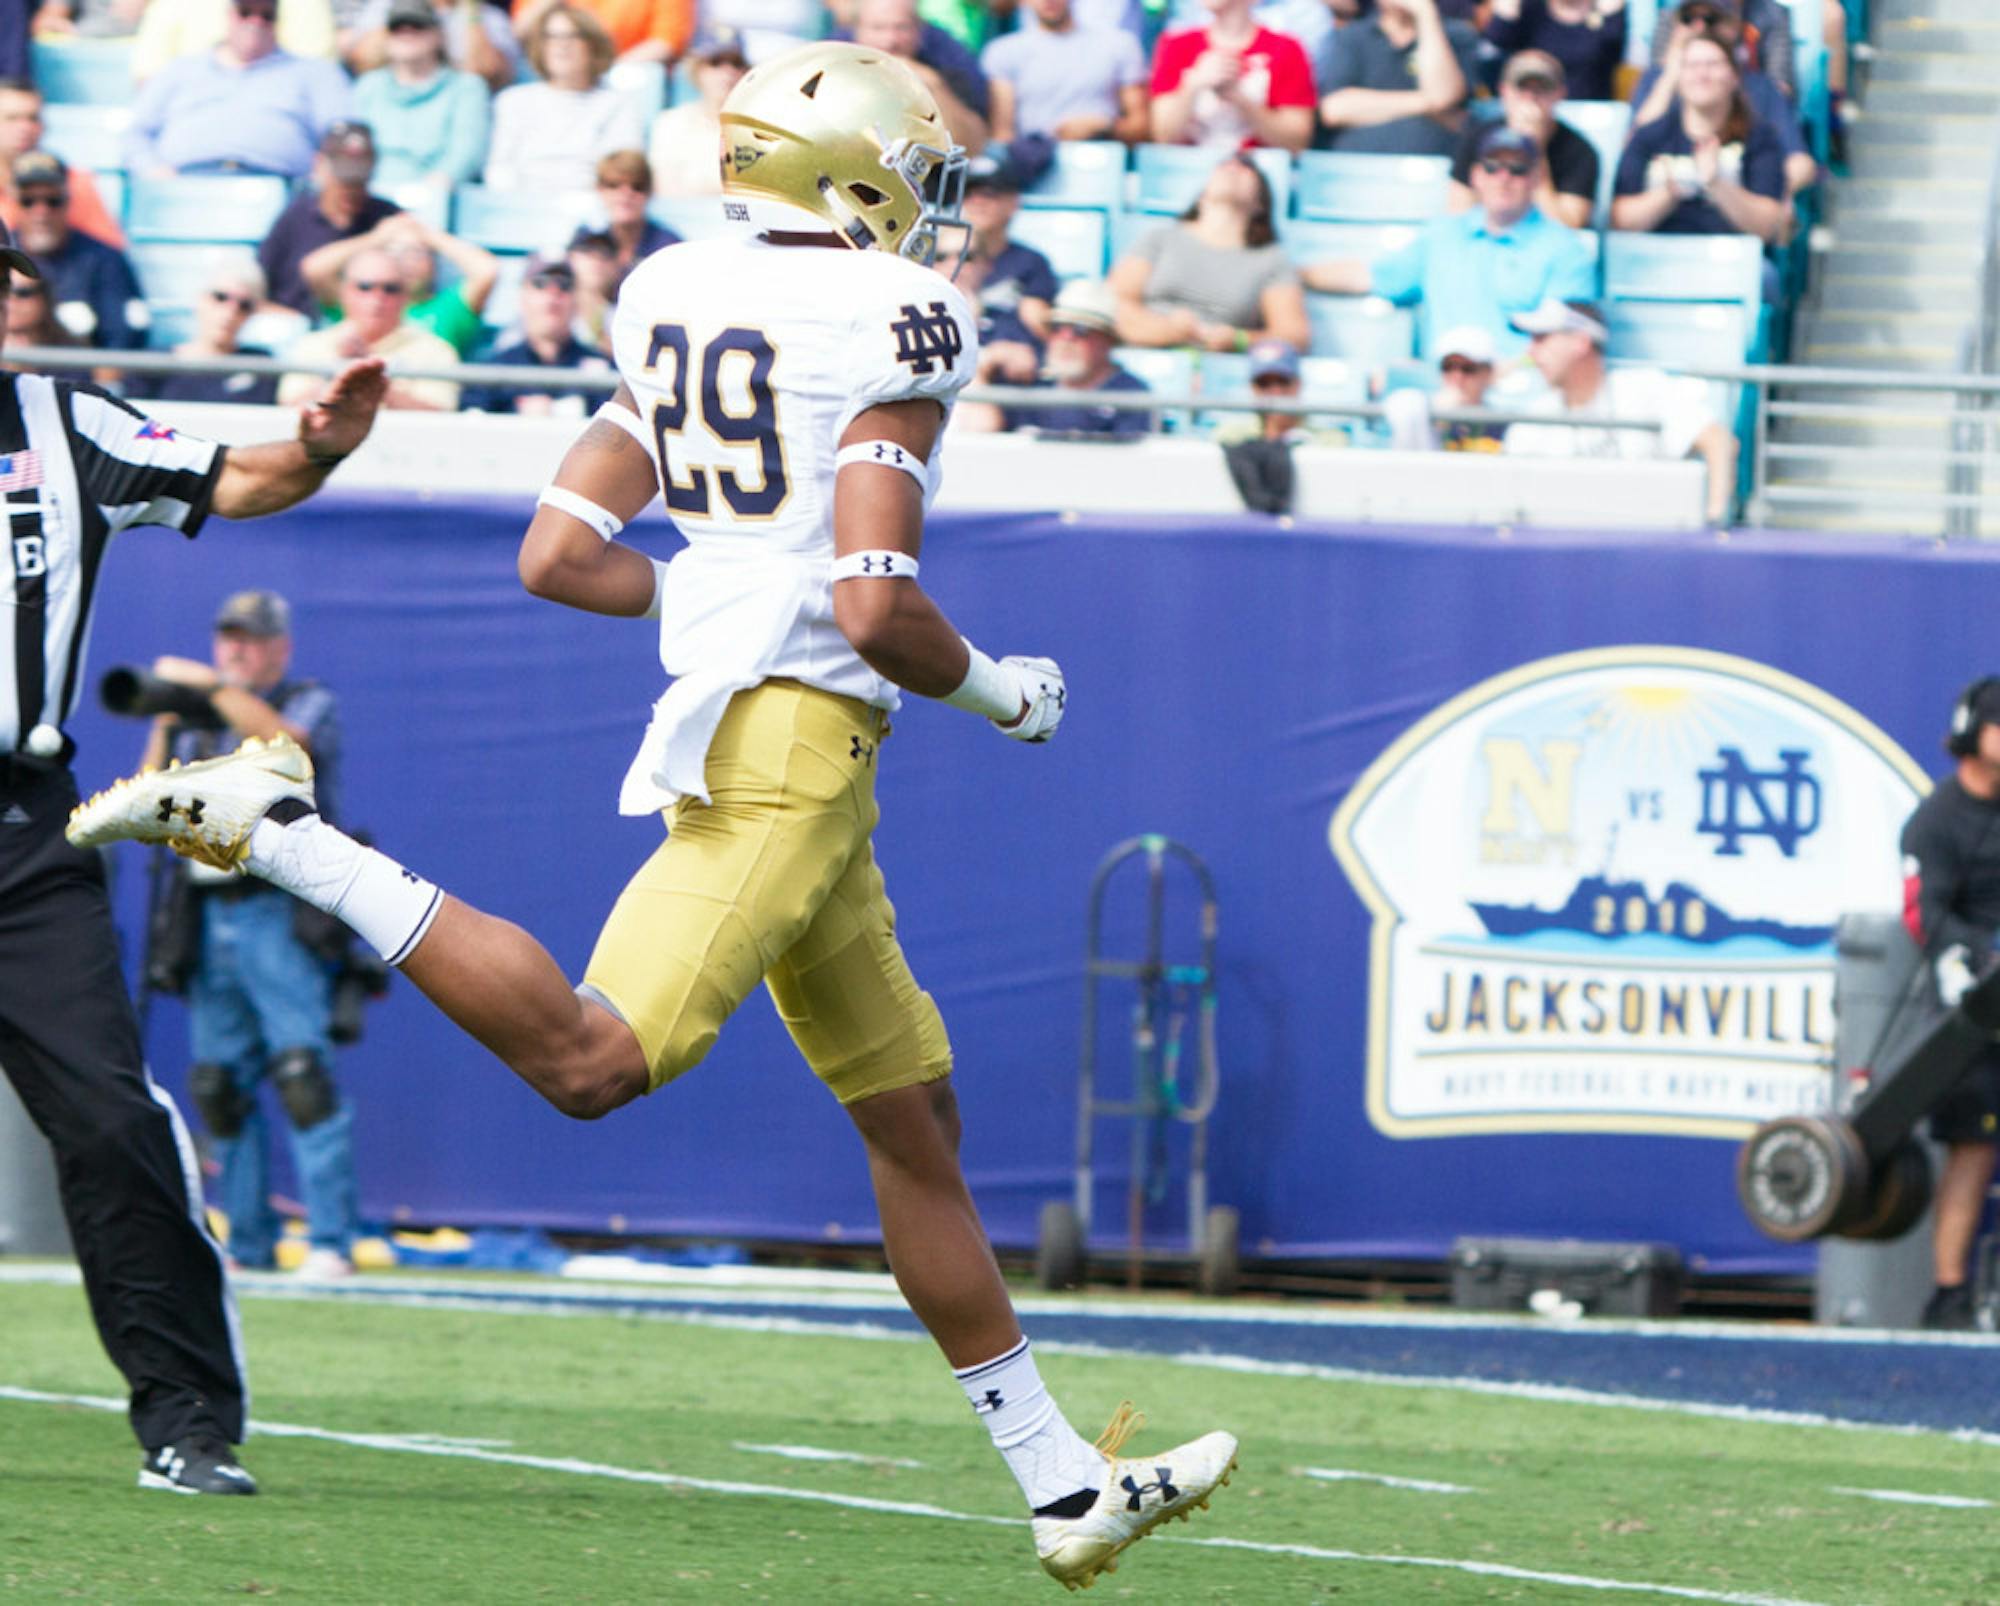 Irish sophomore receiver Kevin Stepherson runs toward the endzone during Notre Dame's 28-27 loss to Navy on Nov. 5 at EverBank Field in Jacksonville, Florida.